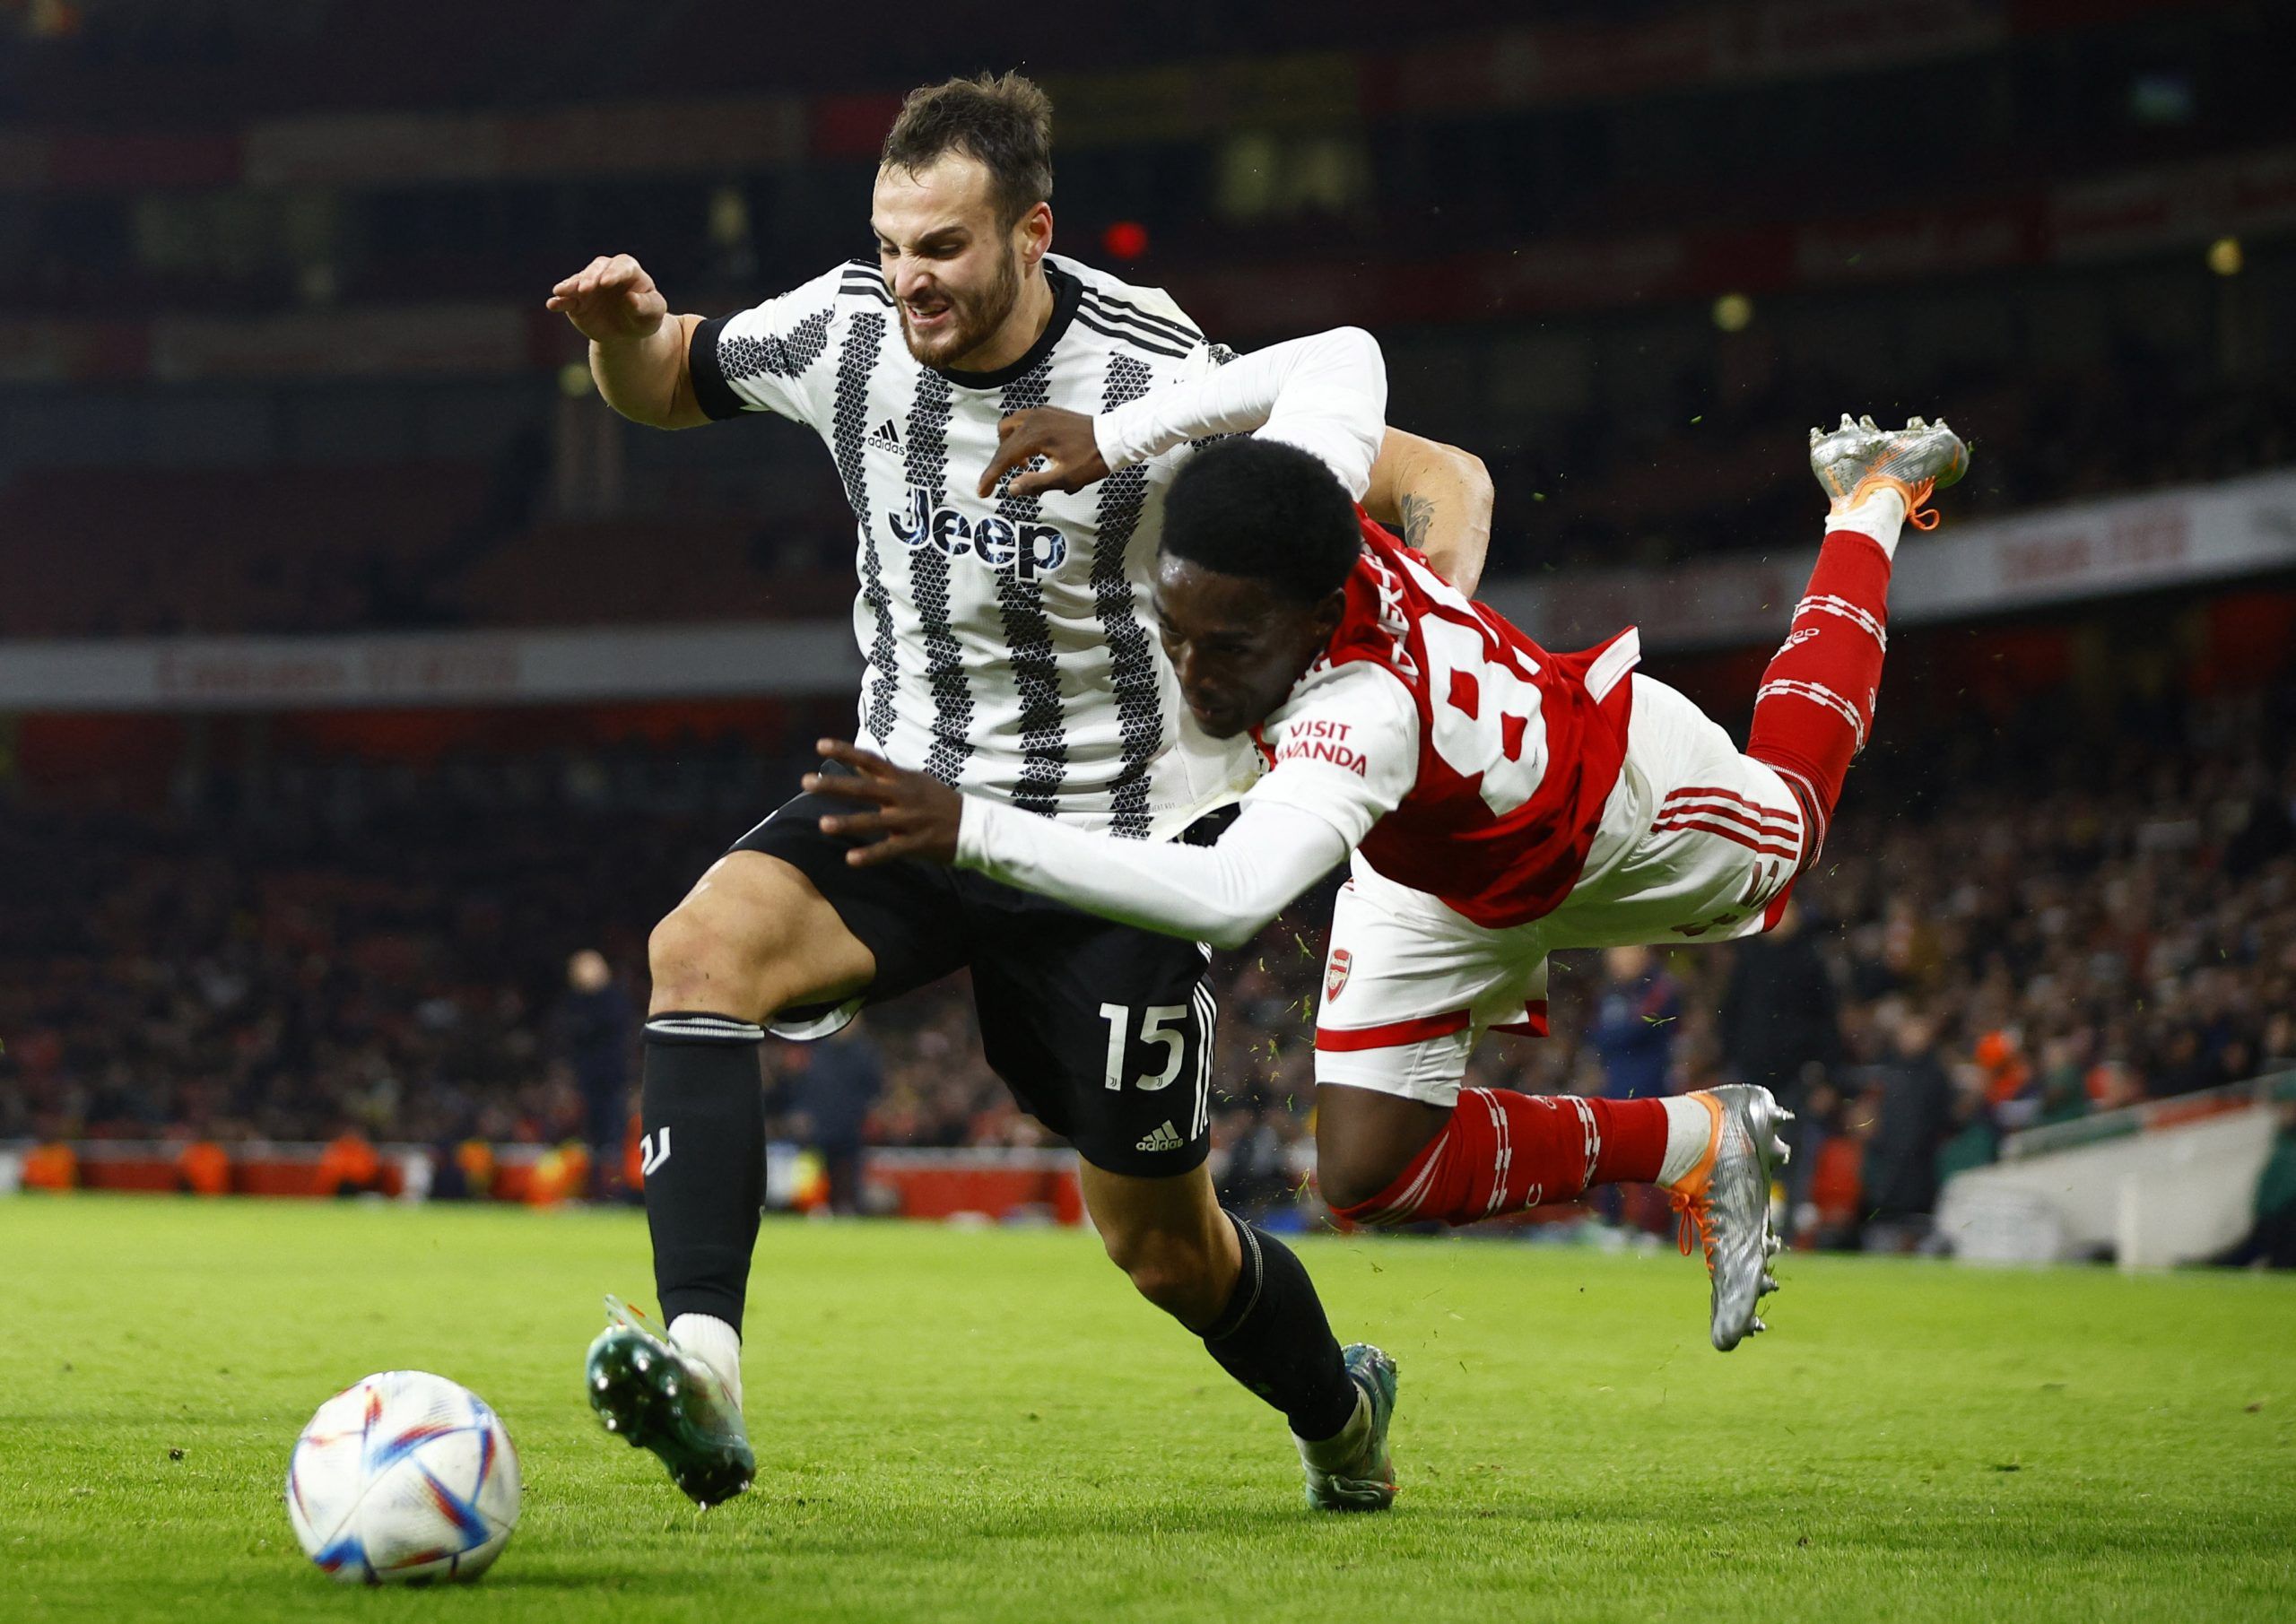 Soccer Football - Friendly - Arsenal v Juventus - Emirates Stadium, London, Britain - December 17, 2022 Arsenal's Amario Cozier-Duberry in action with Juventus' Federico Gatti Action Images via Reuters/John Sibley